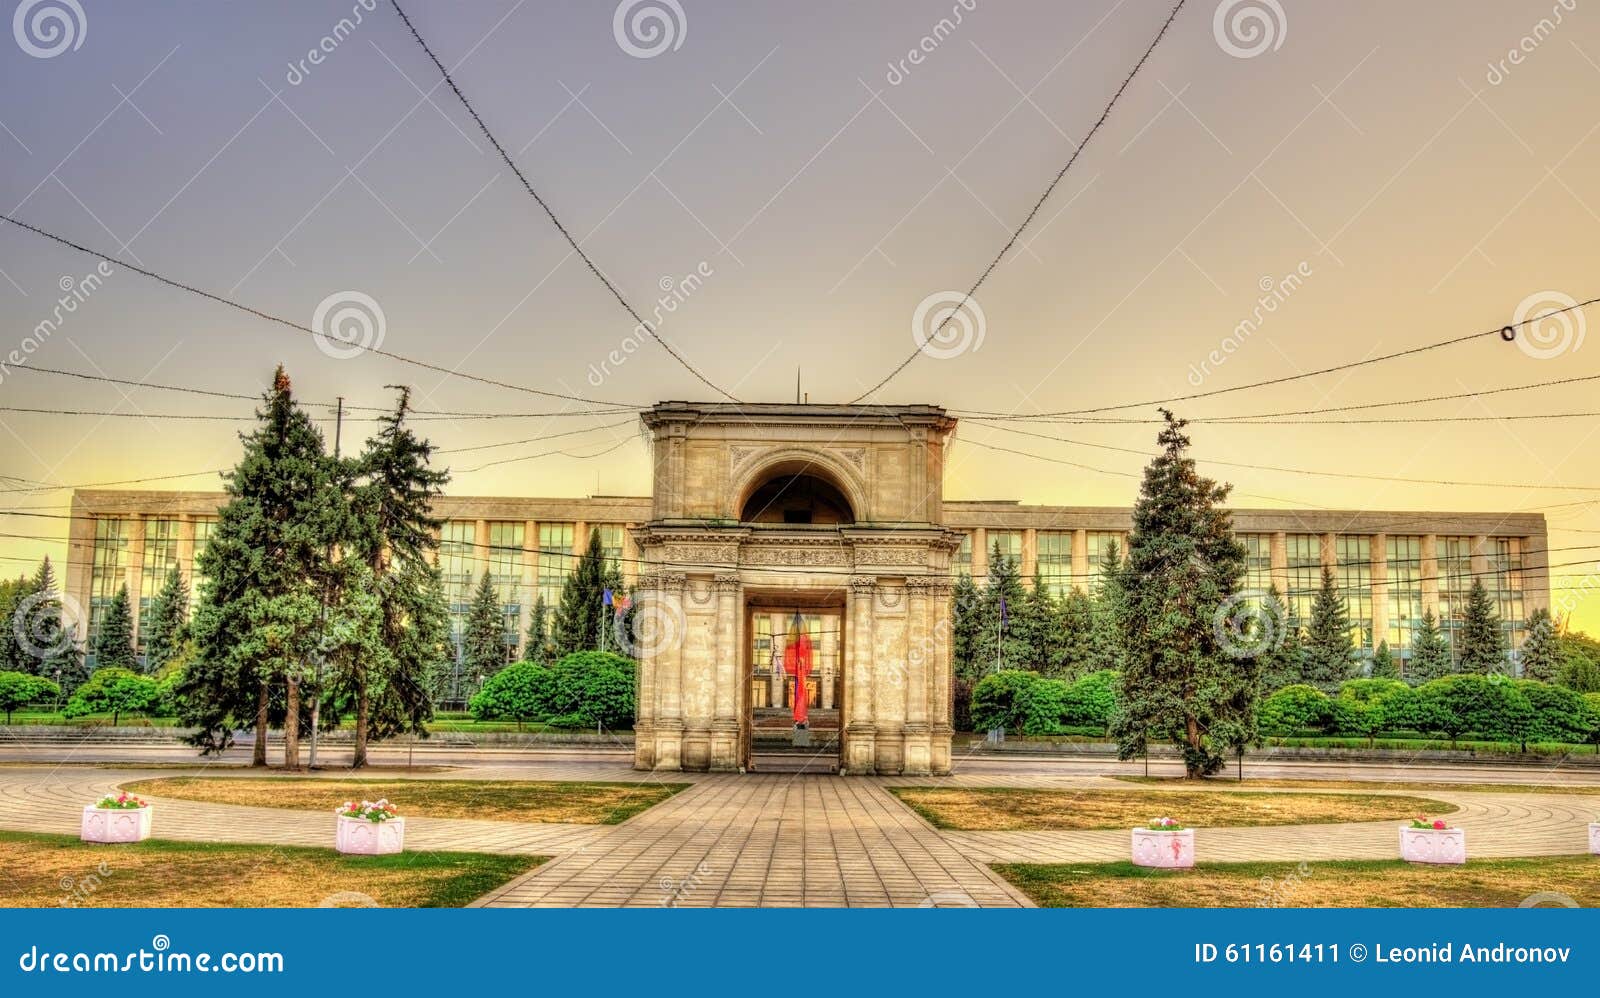 the triumphal arch and the government building in chisinau - mol